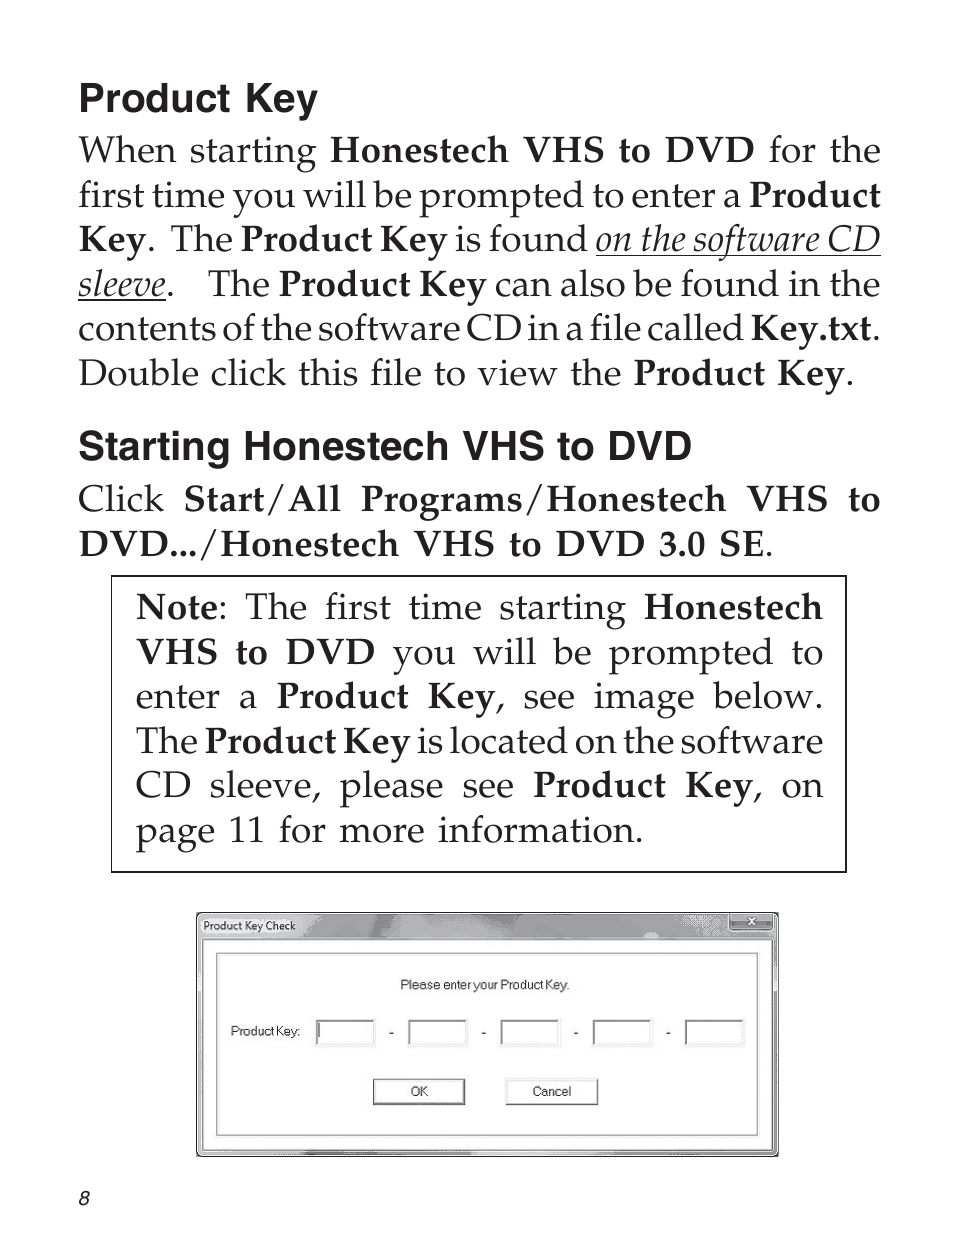 honestech vhs to dvd 7.0 deluxe product key